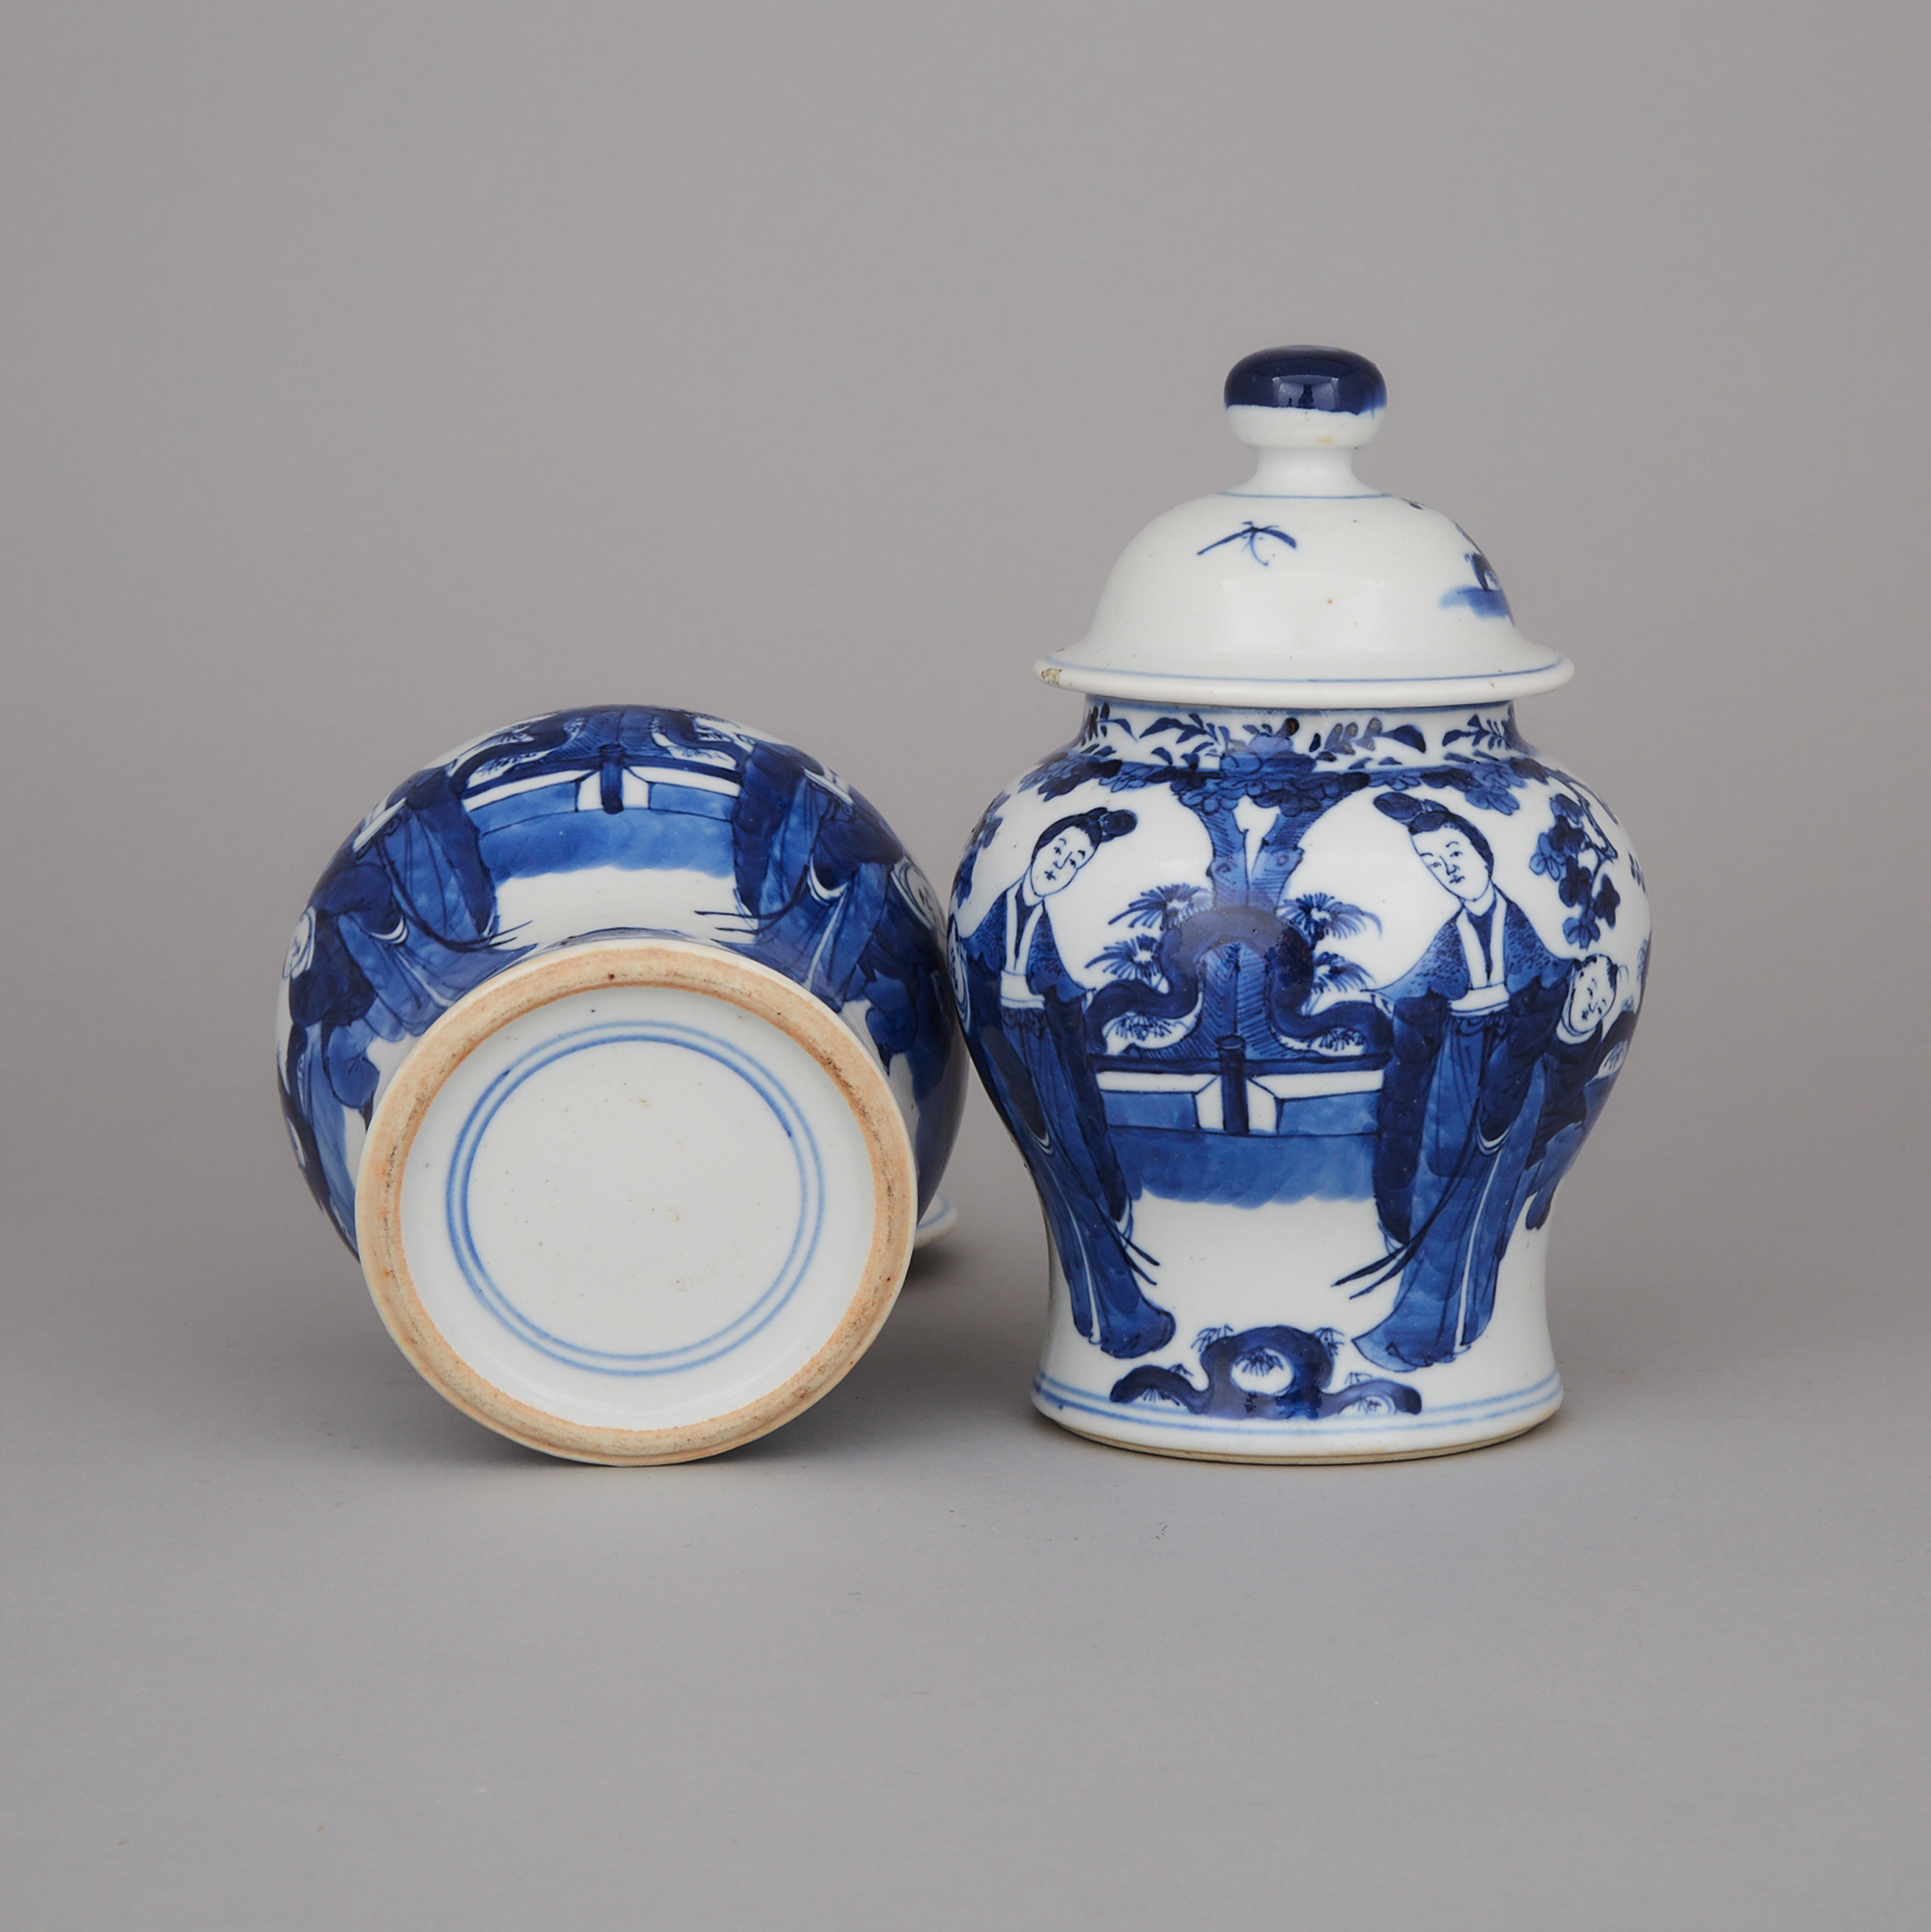 A Pair of Blue and White Lidded Jars